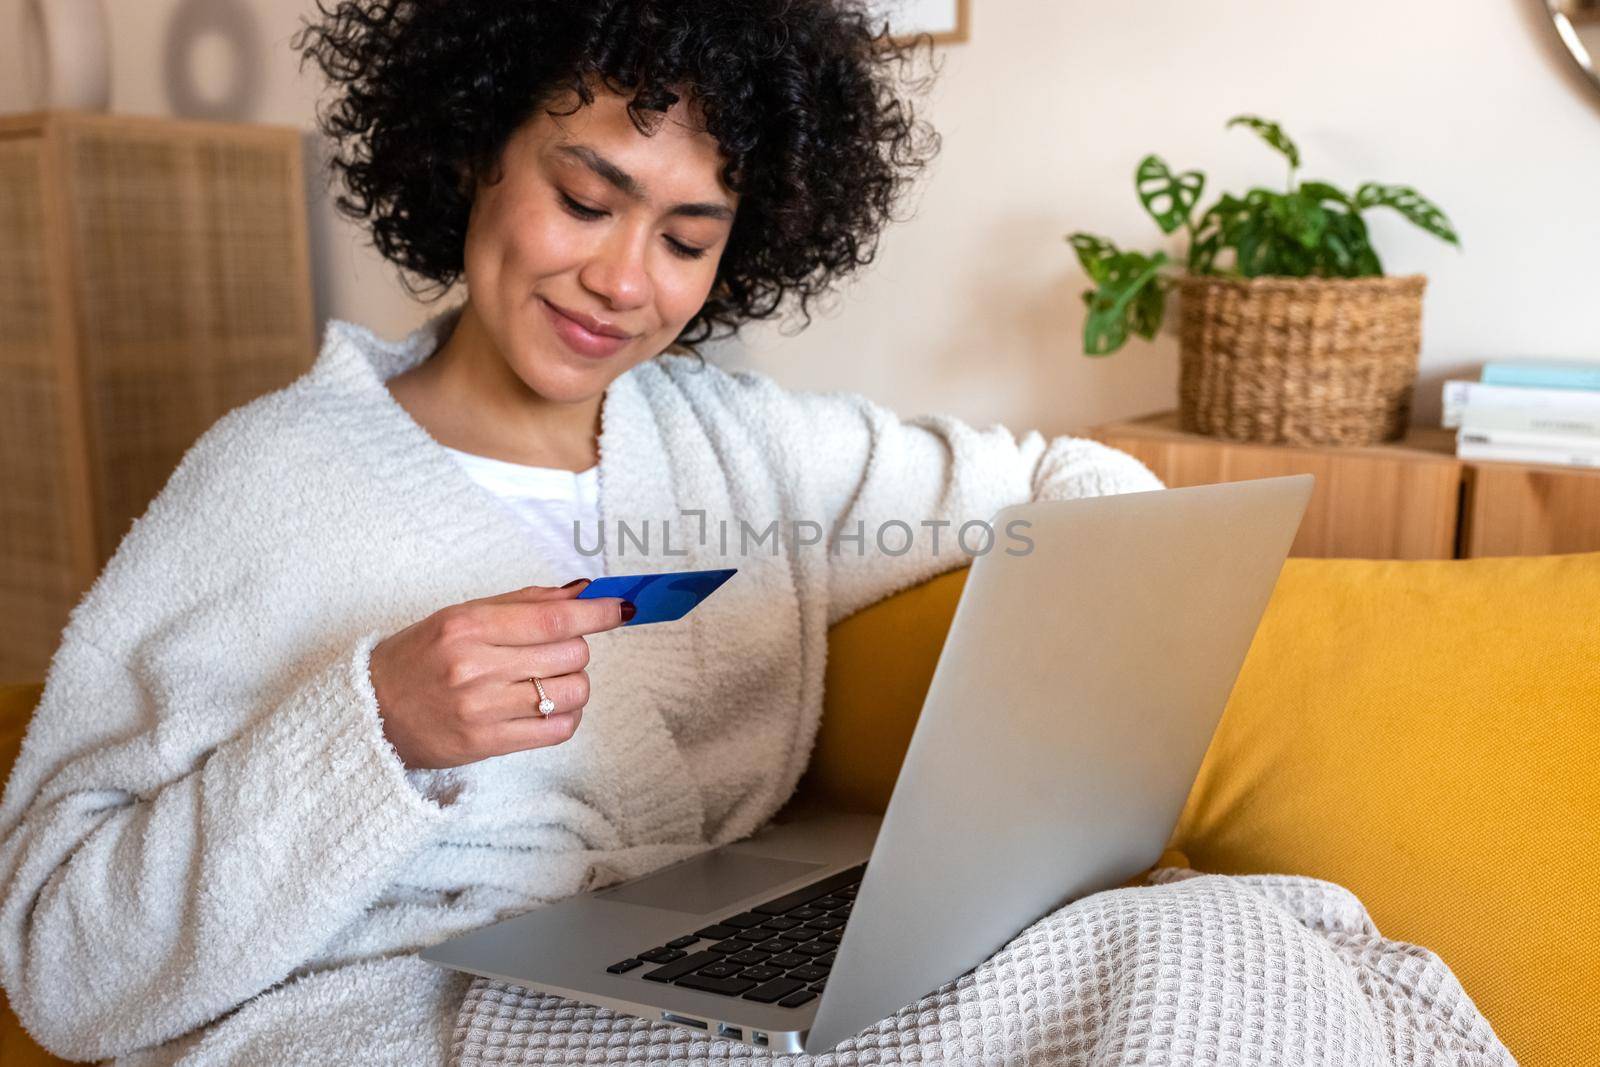 African american woman using laptop and reading credit card information to shop online at home sitting on sofa. Lifestyle and e-commerce concept.